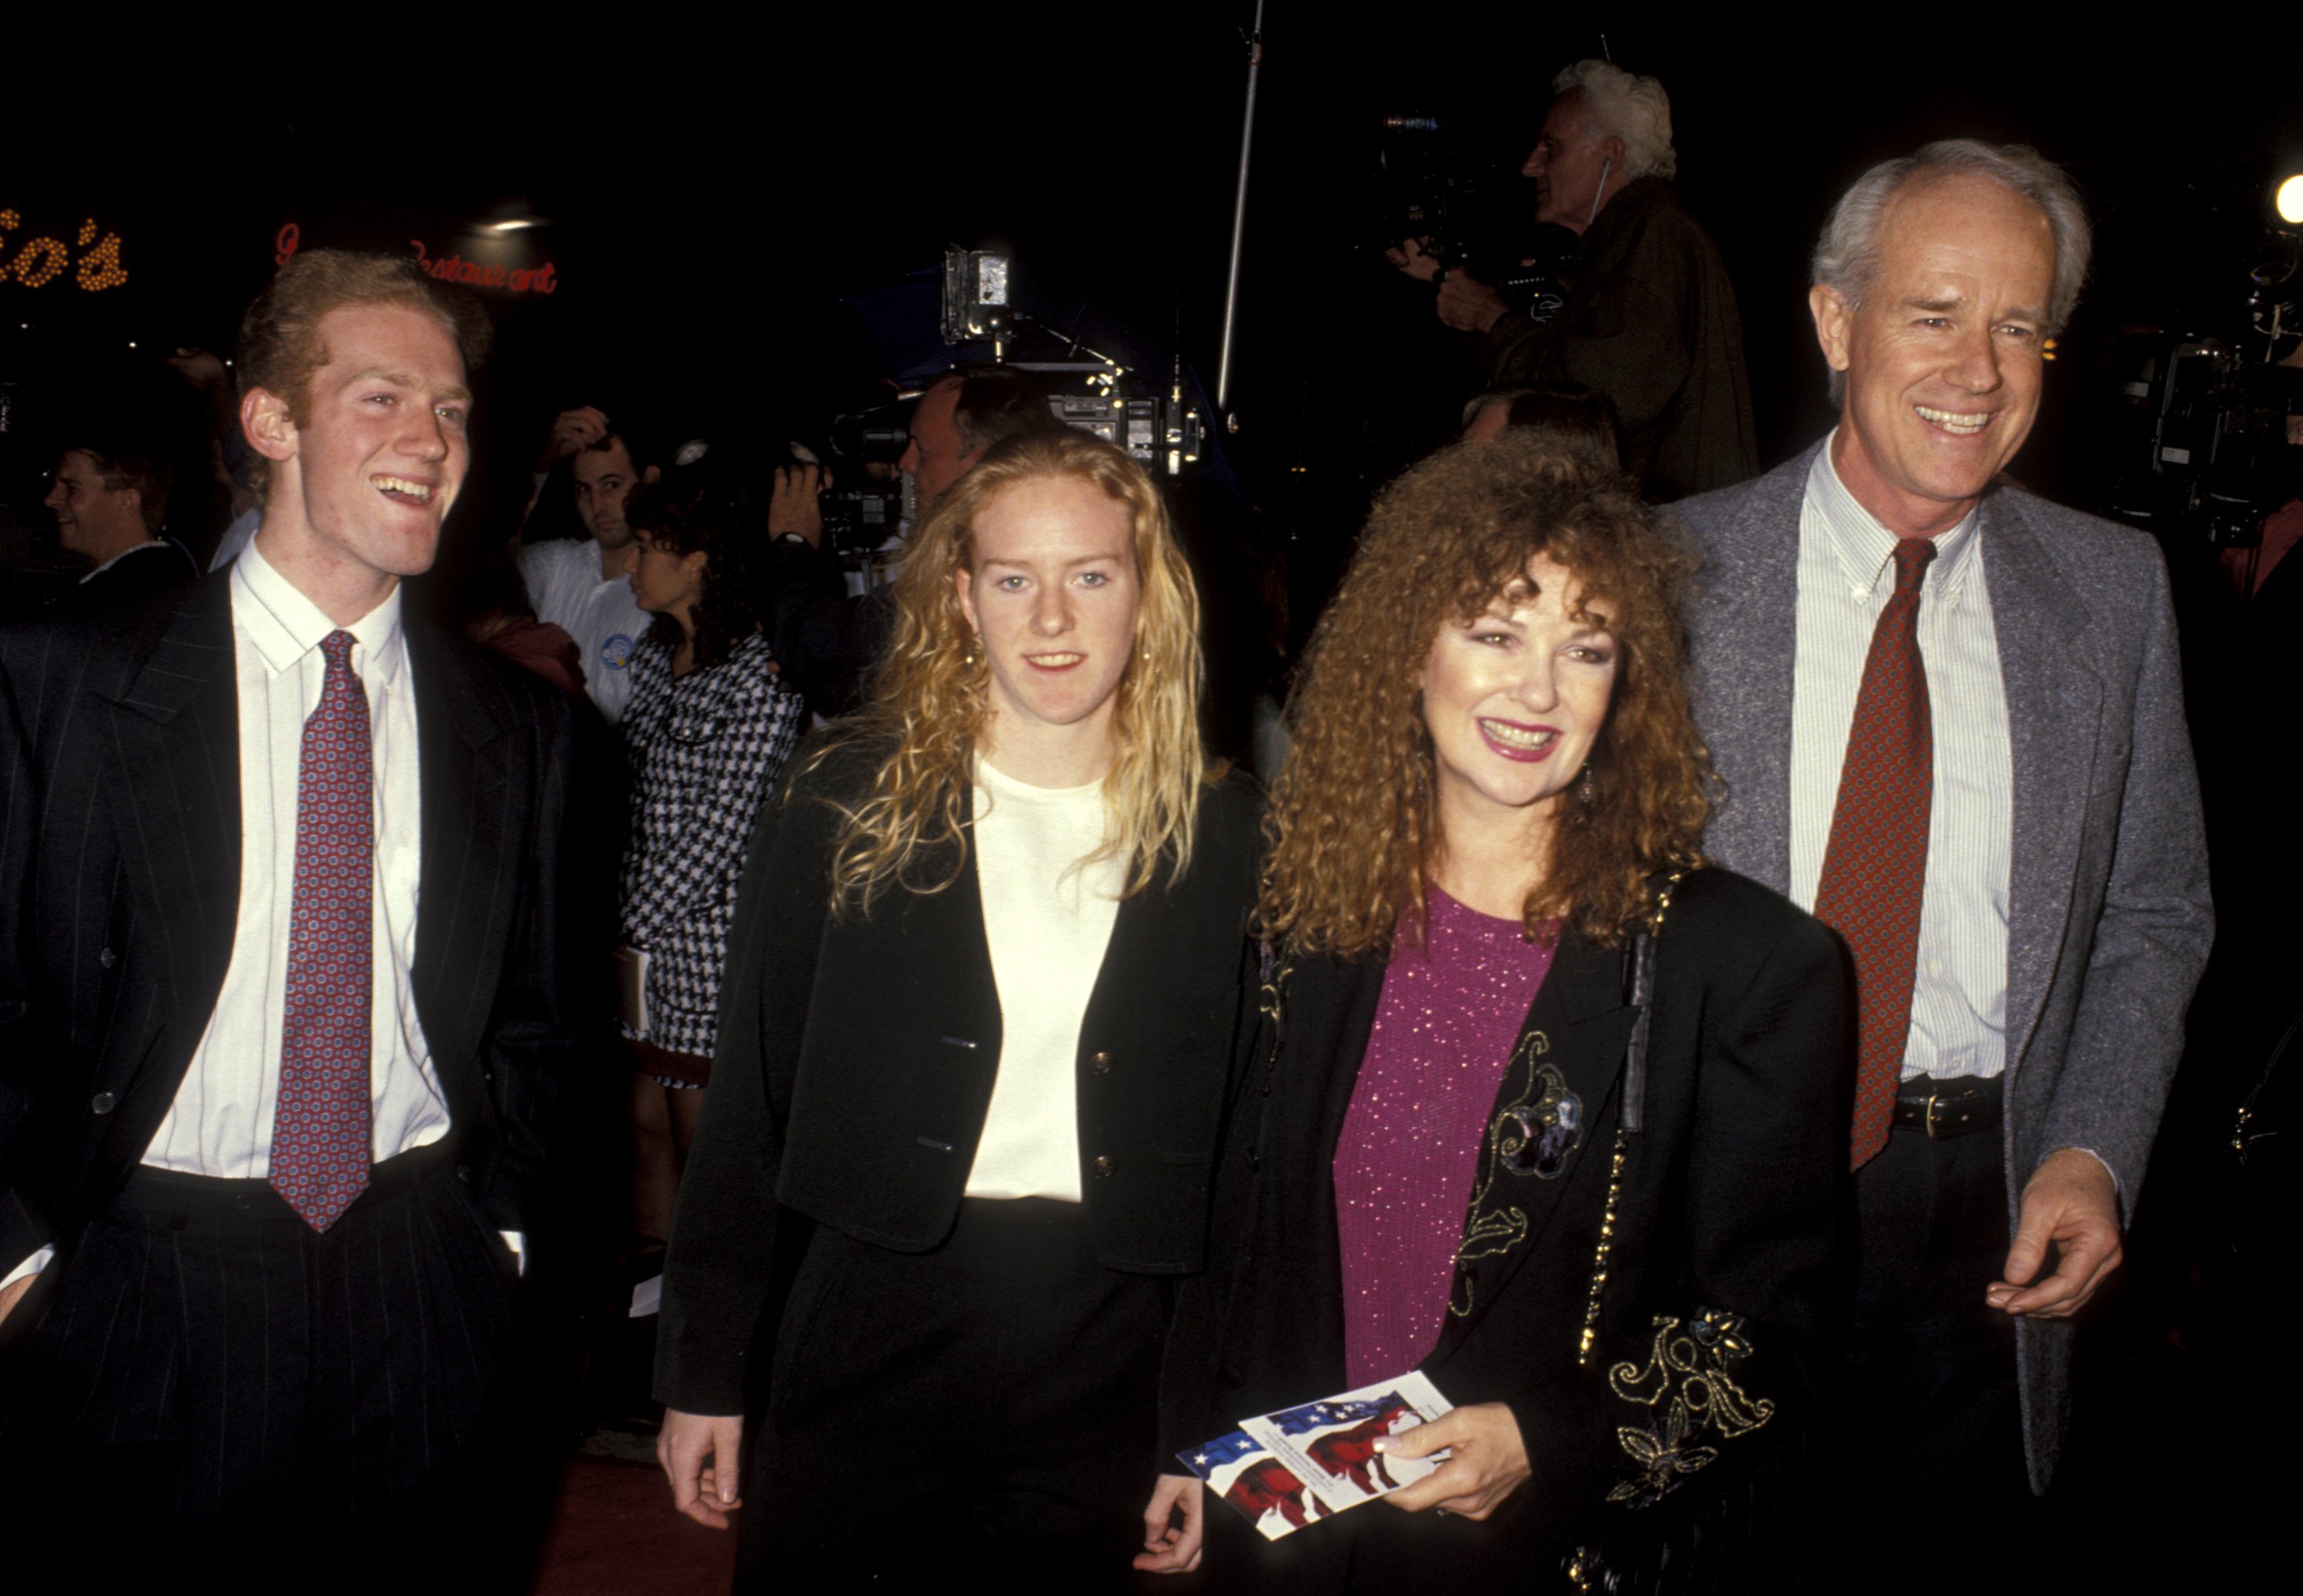 Shelly Fabares, Mike Farrel and children Mike Farrell, Jr. and Erin Farrell attend the "JFK" World Premiere at Mann's Village Theater on December 17, 1991 in Westwood, California ┃Source: Getty Images